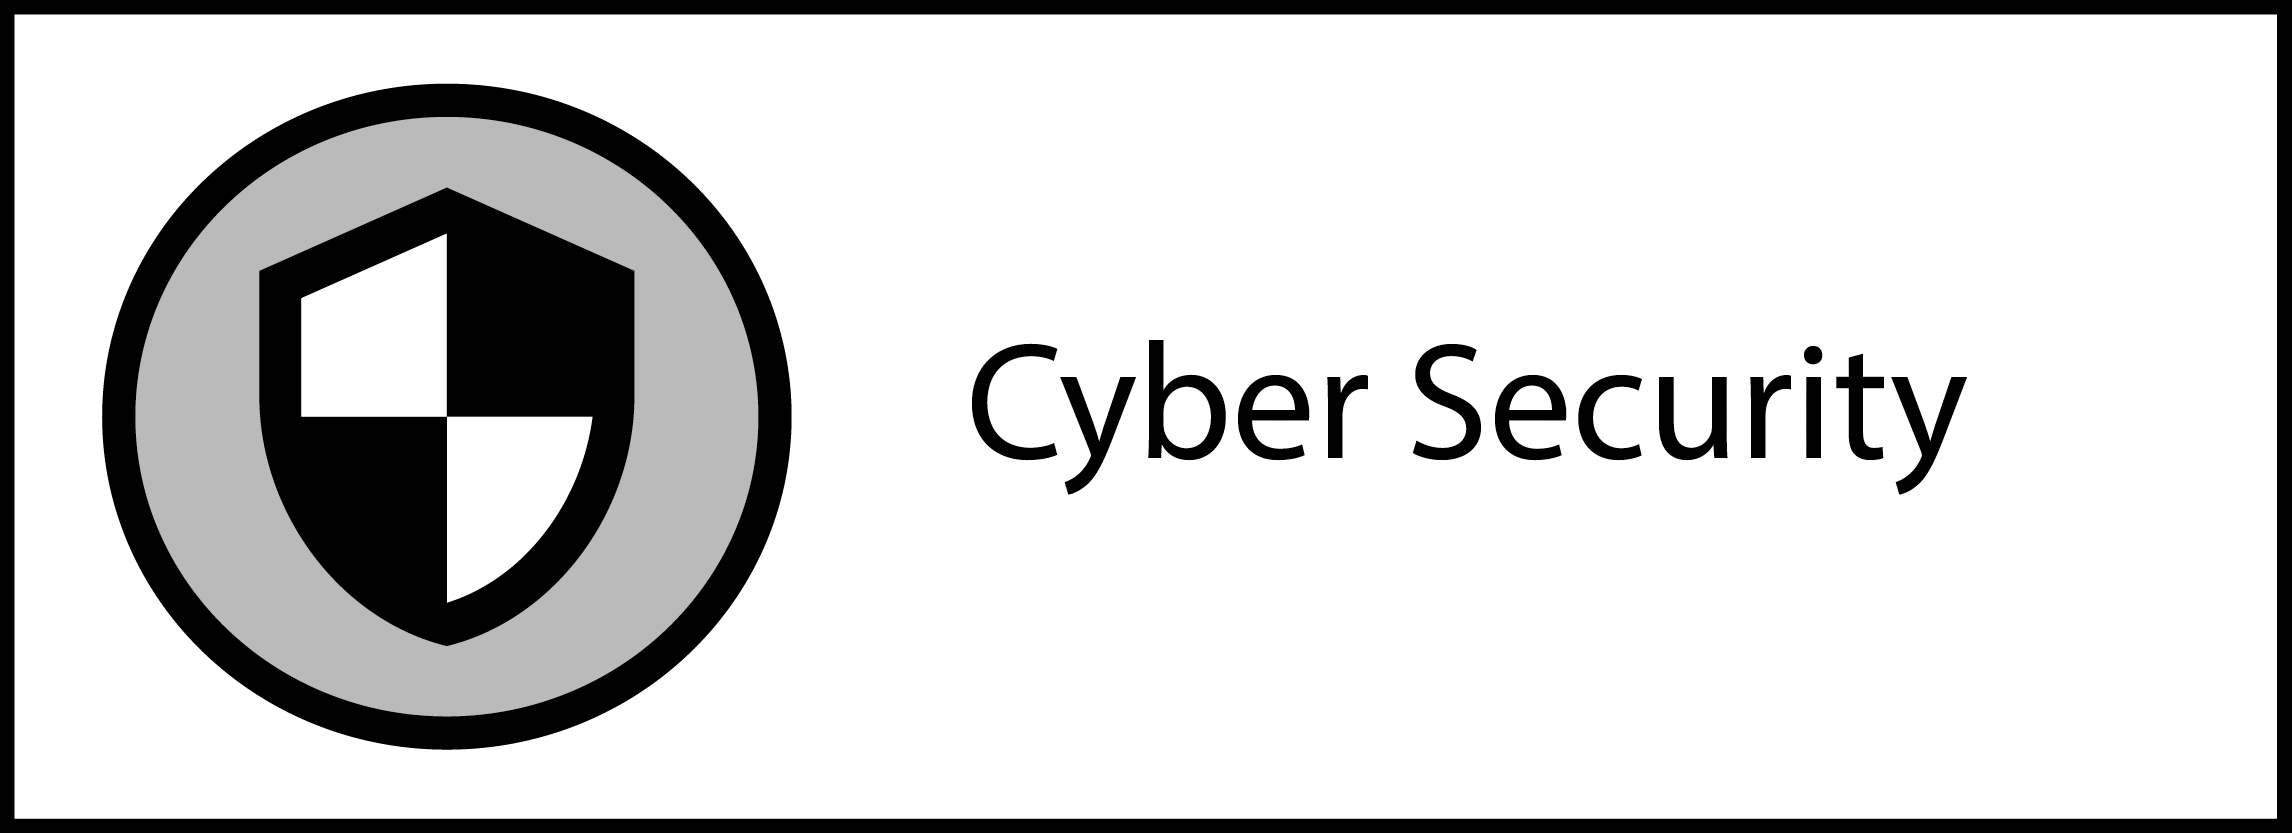 cyber security, data, data protection, network, network support, markham, toronto, computer services, security solution, computer security markham, security services markham, computer security toronto, security services toronto, business cyber security, computer protection, corporate security, data backup